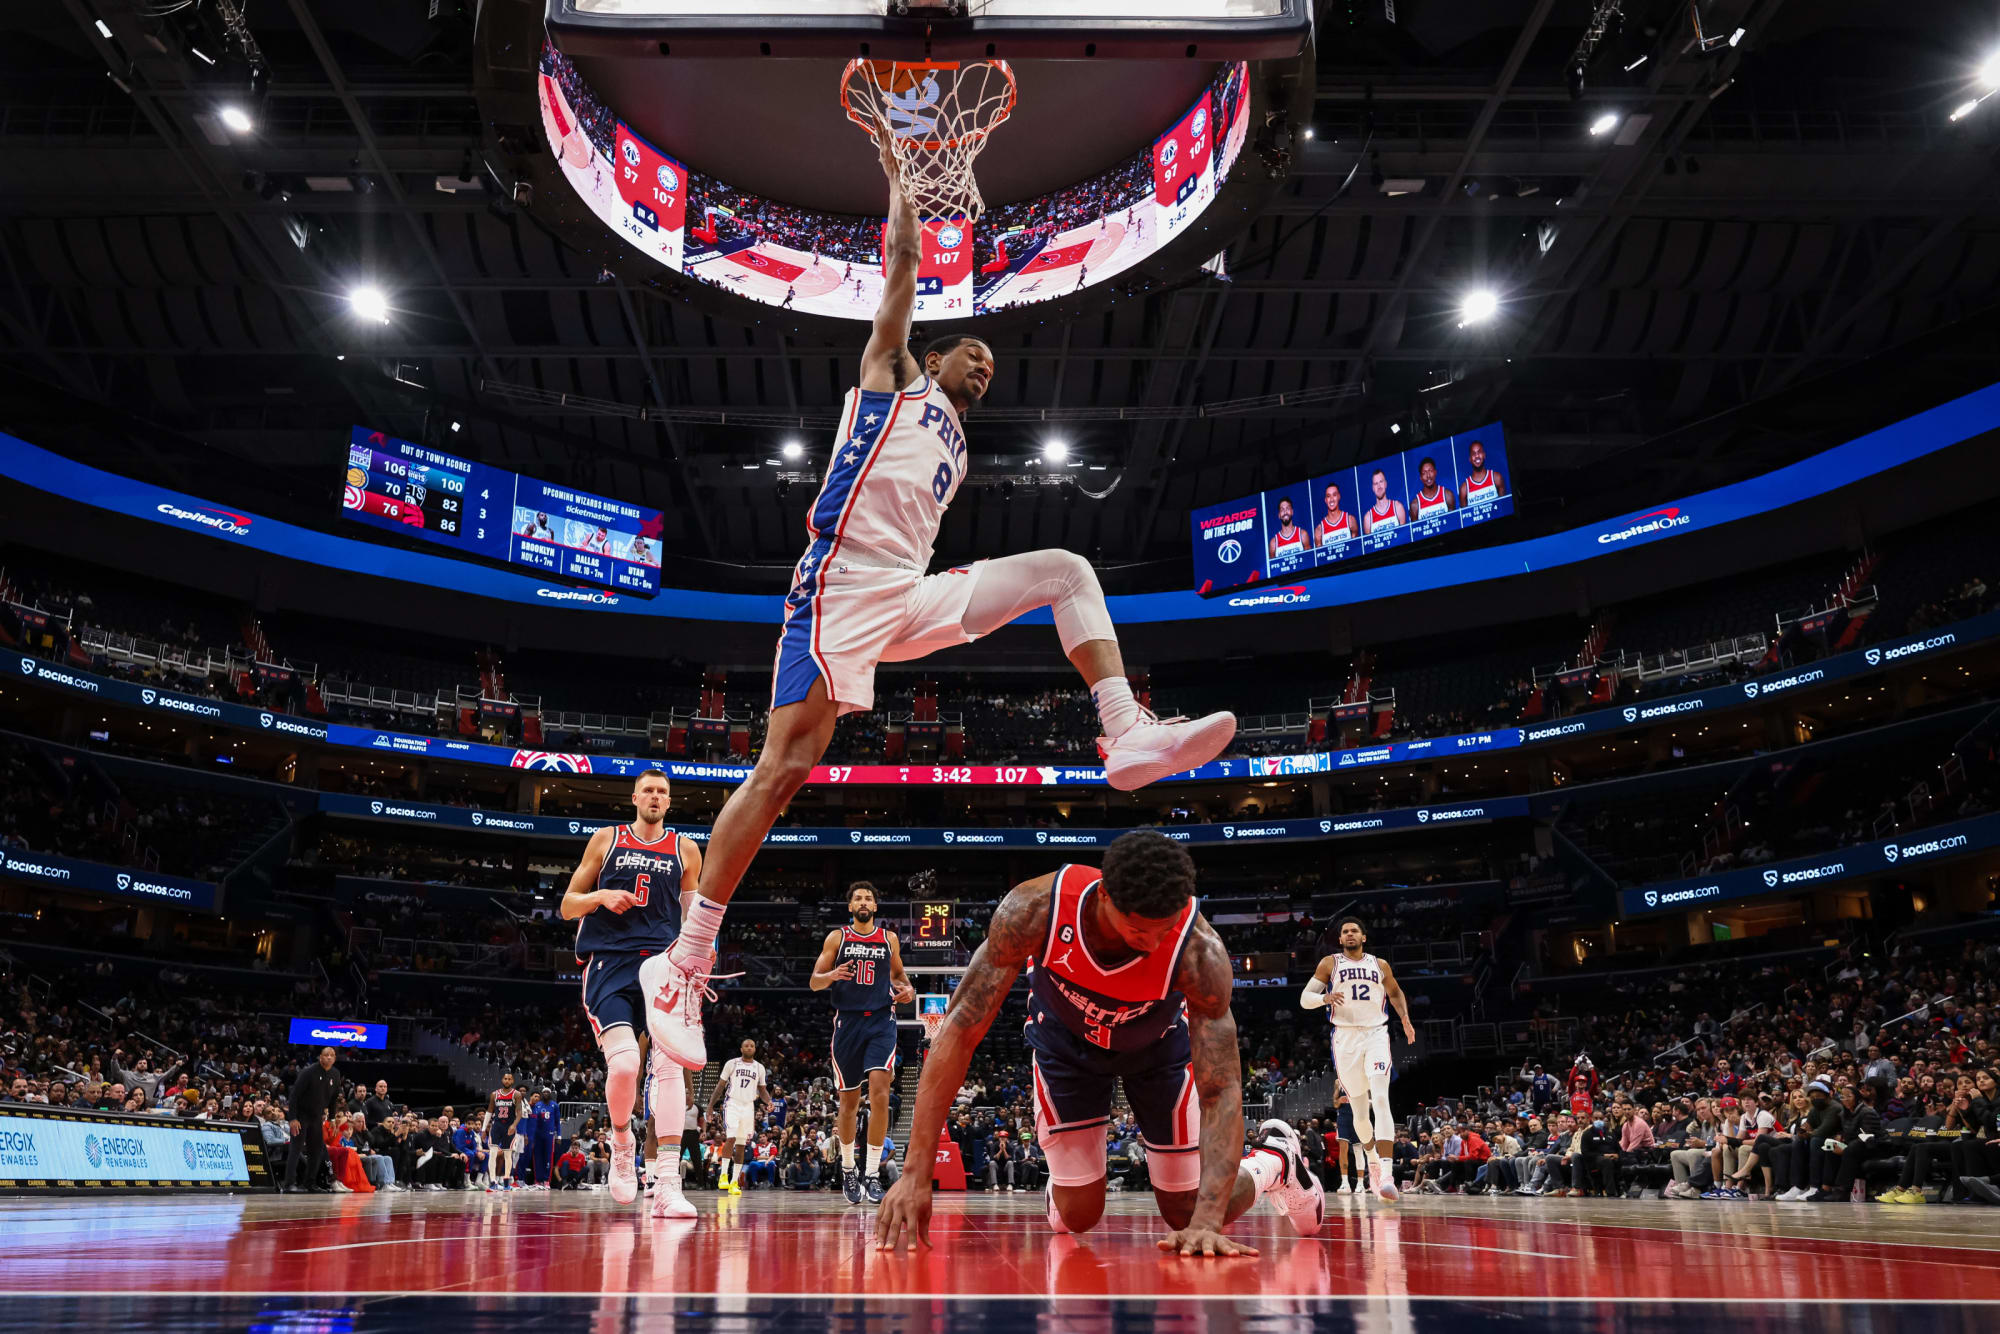 Sixers: Is De’Anthony Melton part of the Core Four?